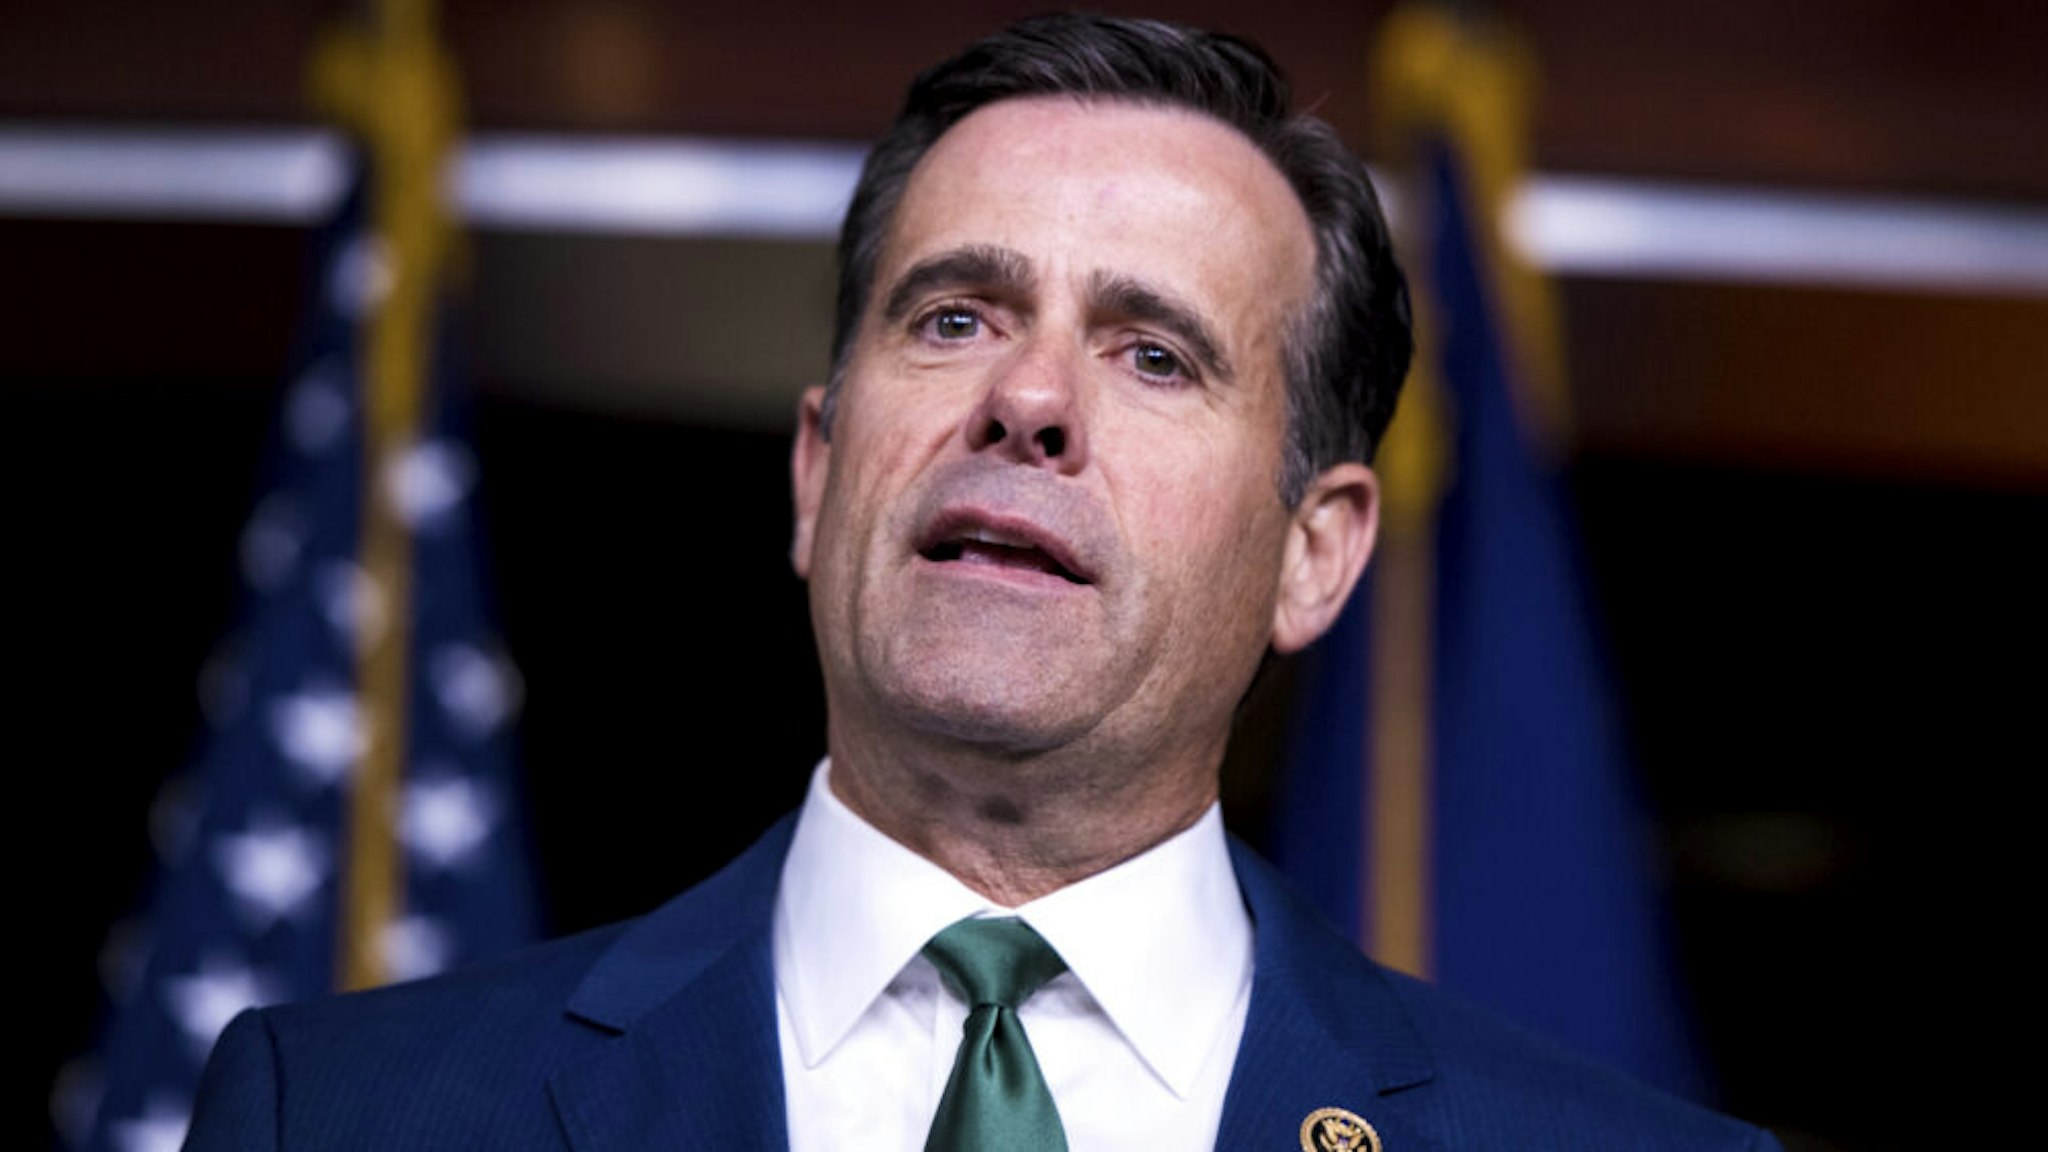 UNITED STATES - MARCH 26: Rep. John Ratcliffe, R-Texas, speaks during the House GOP post-caucus press conference in the Capitol on Tuesday, March 26, 2019.